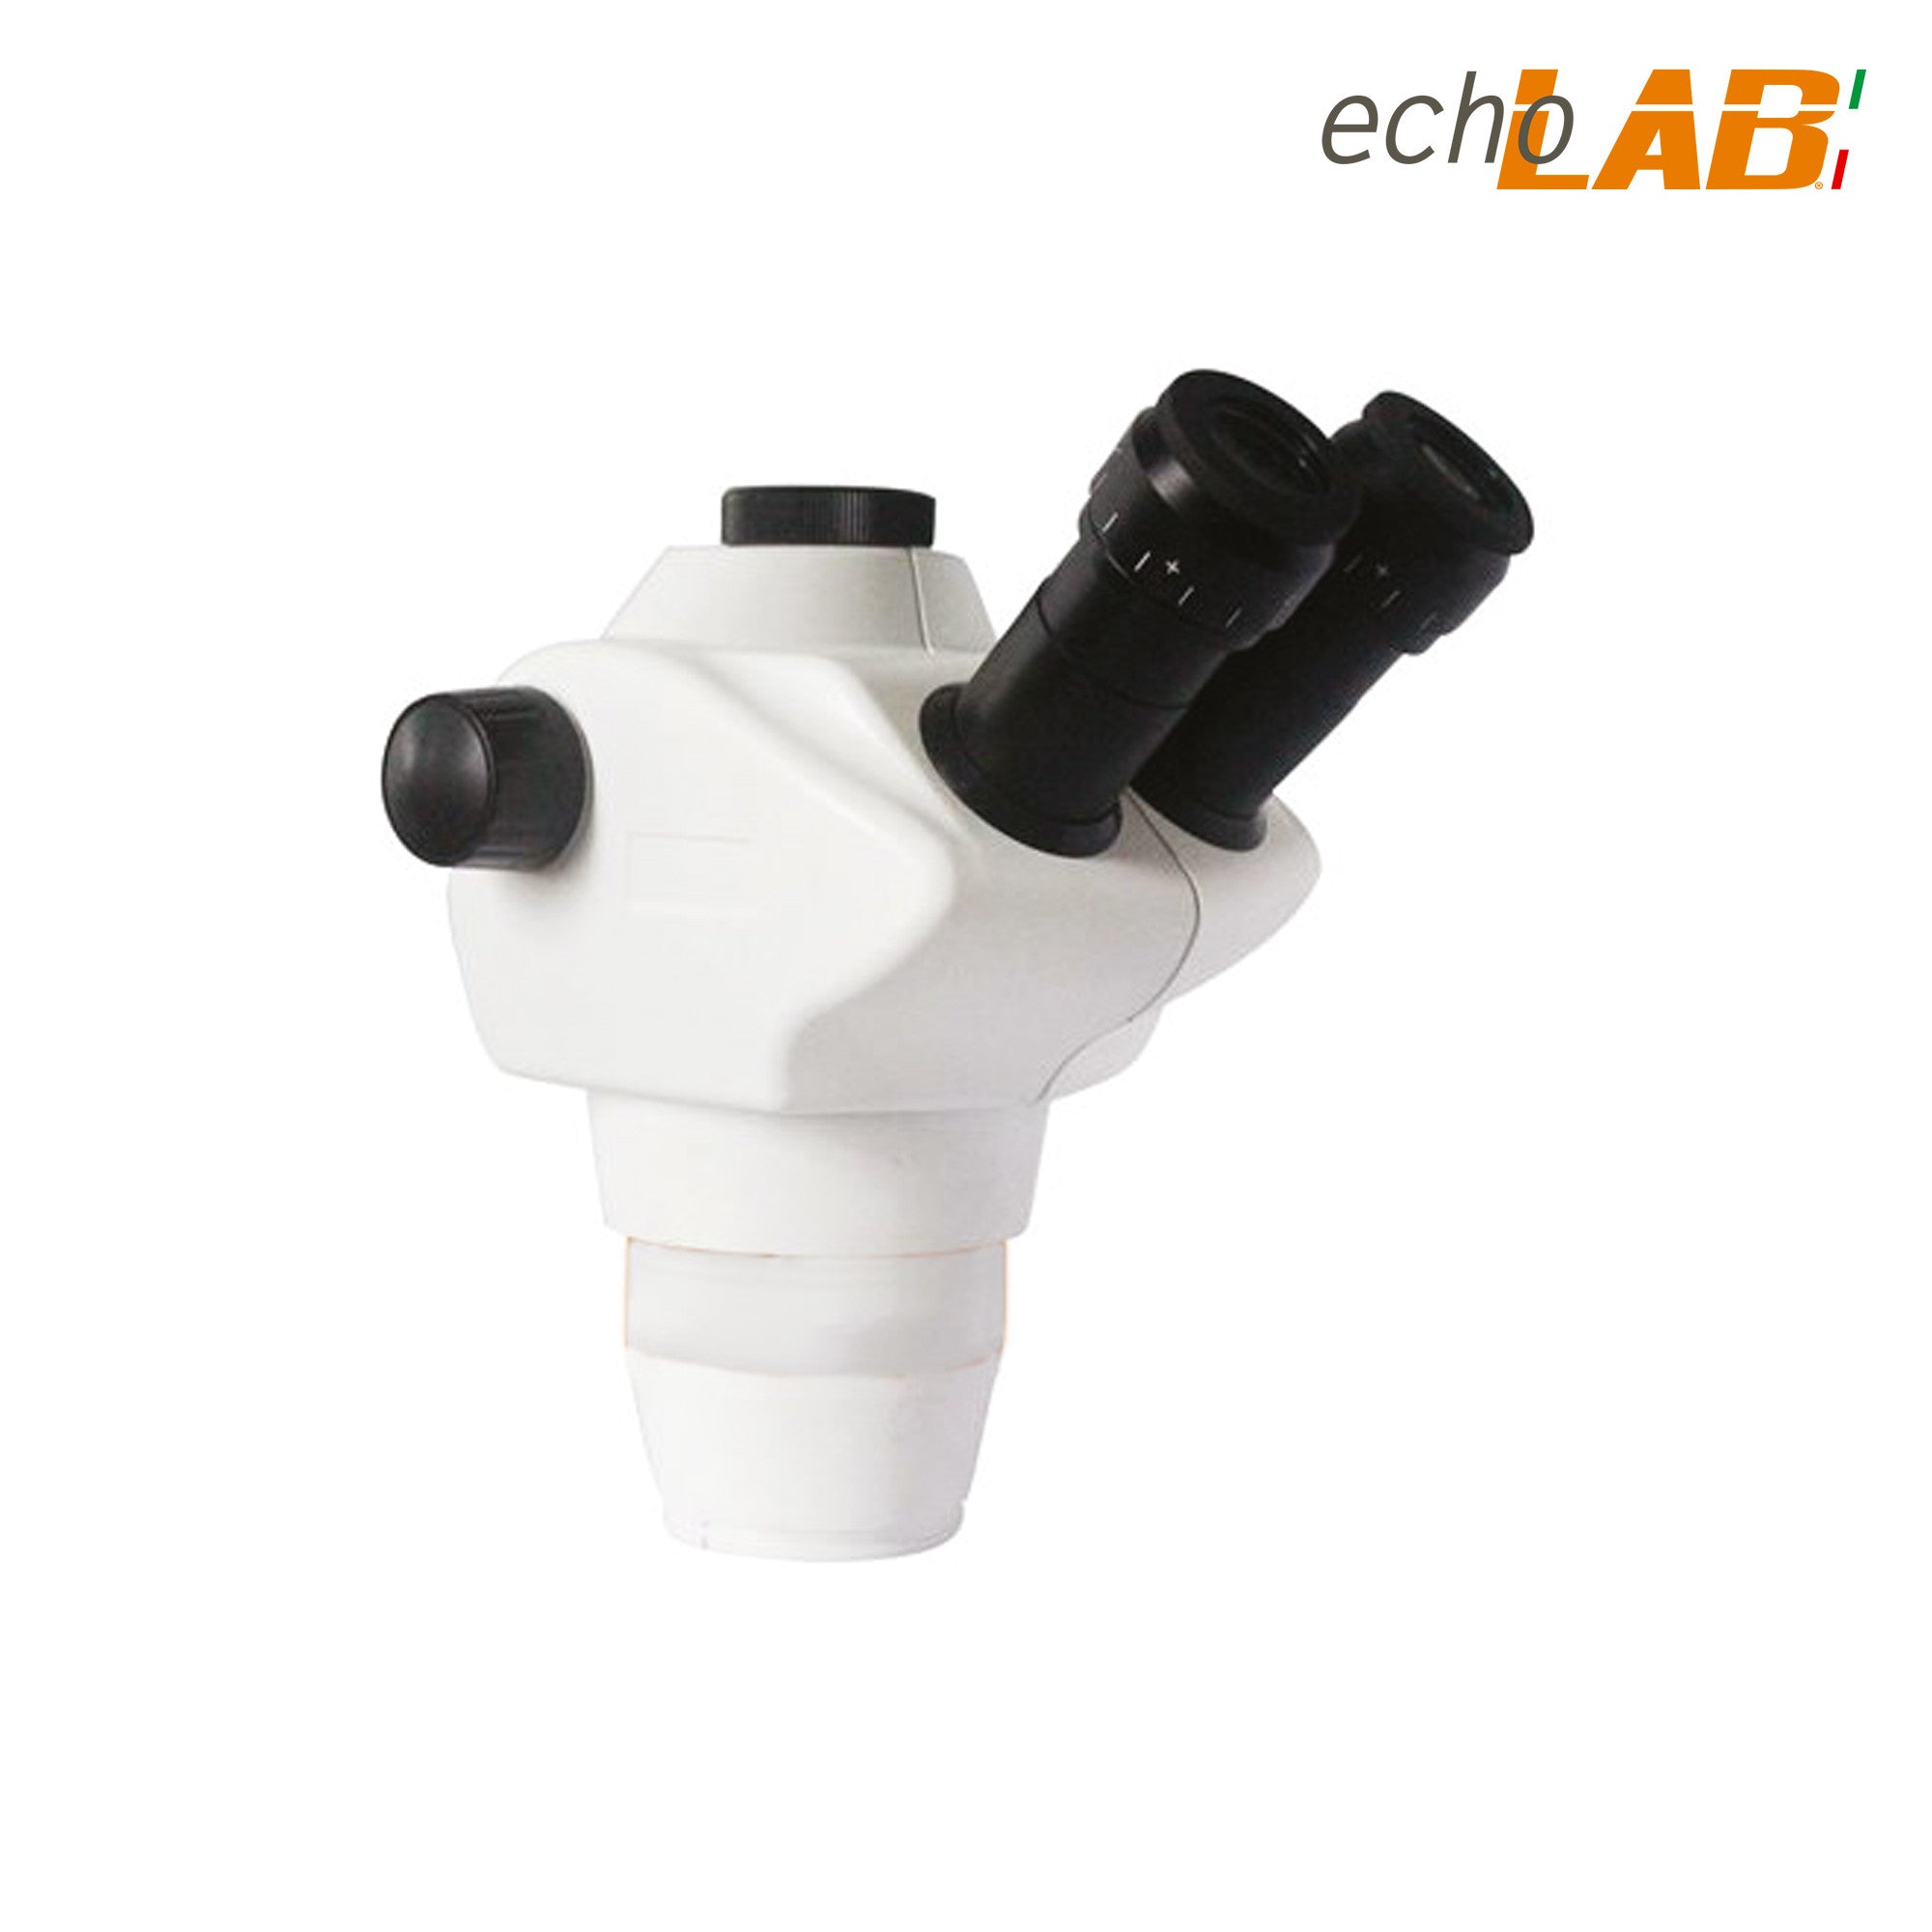 Continuous Zoom Stereo Microscope Head Trinocular and Binocular, eyepice H WF 10x (22mm) - echoLAB